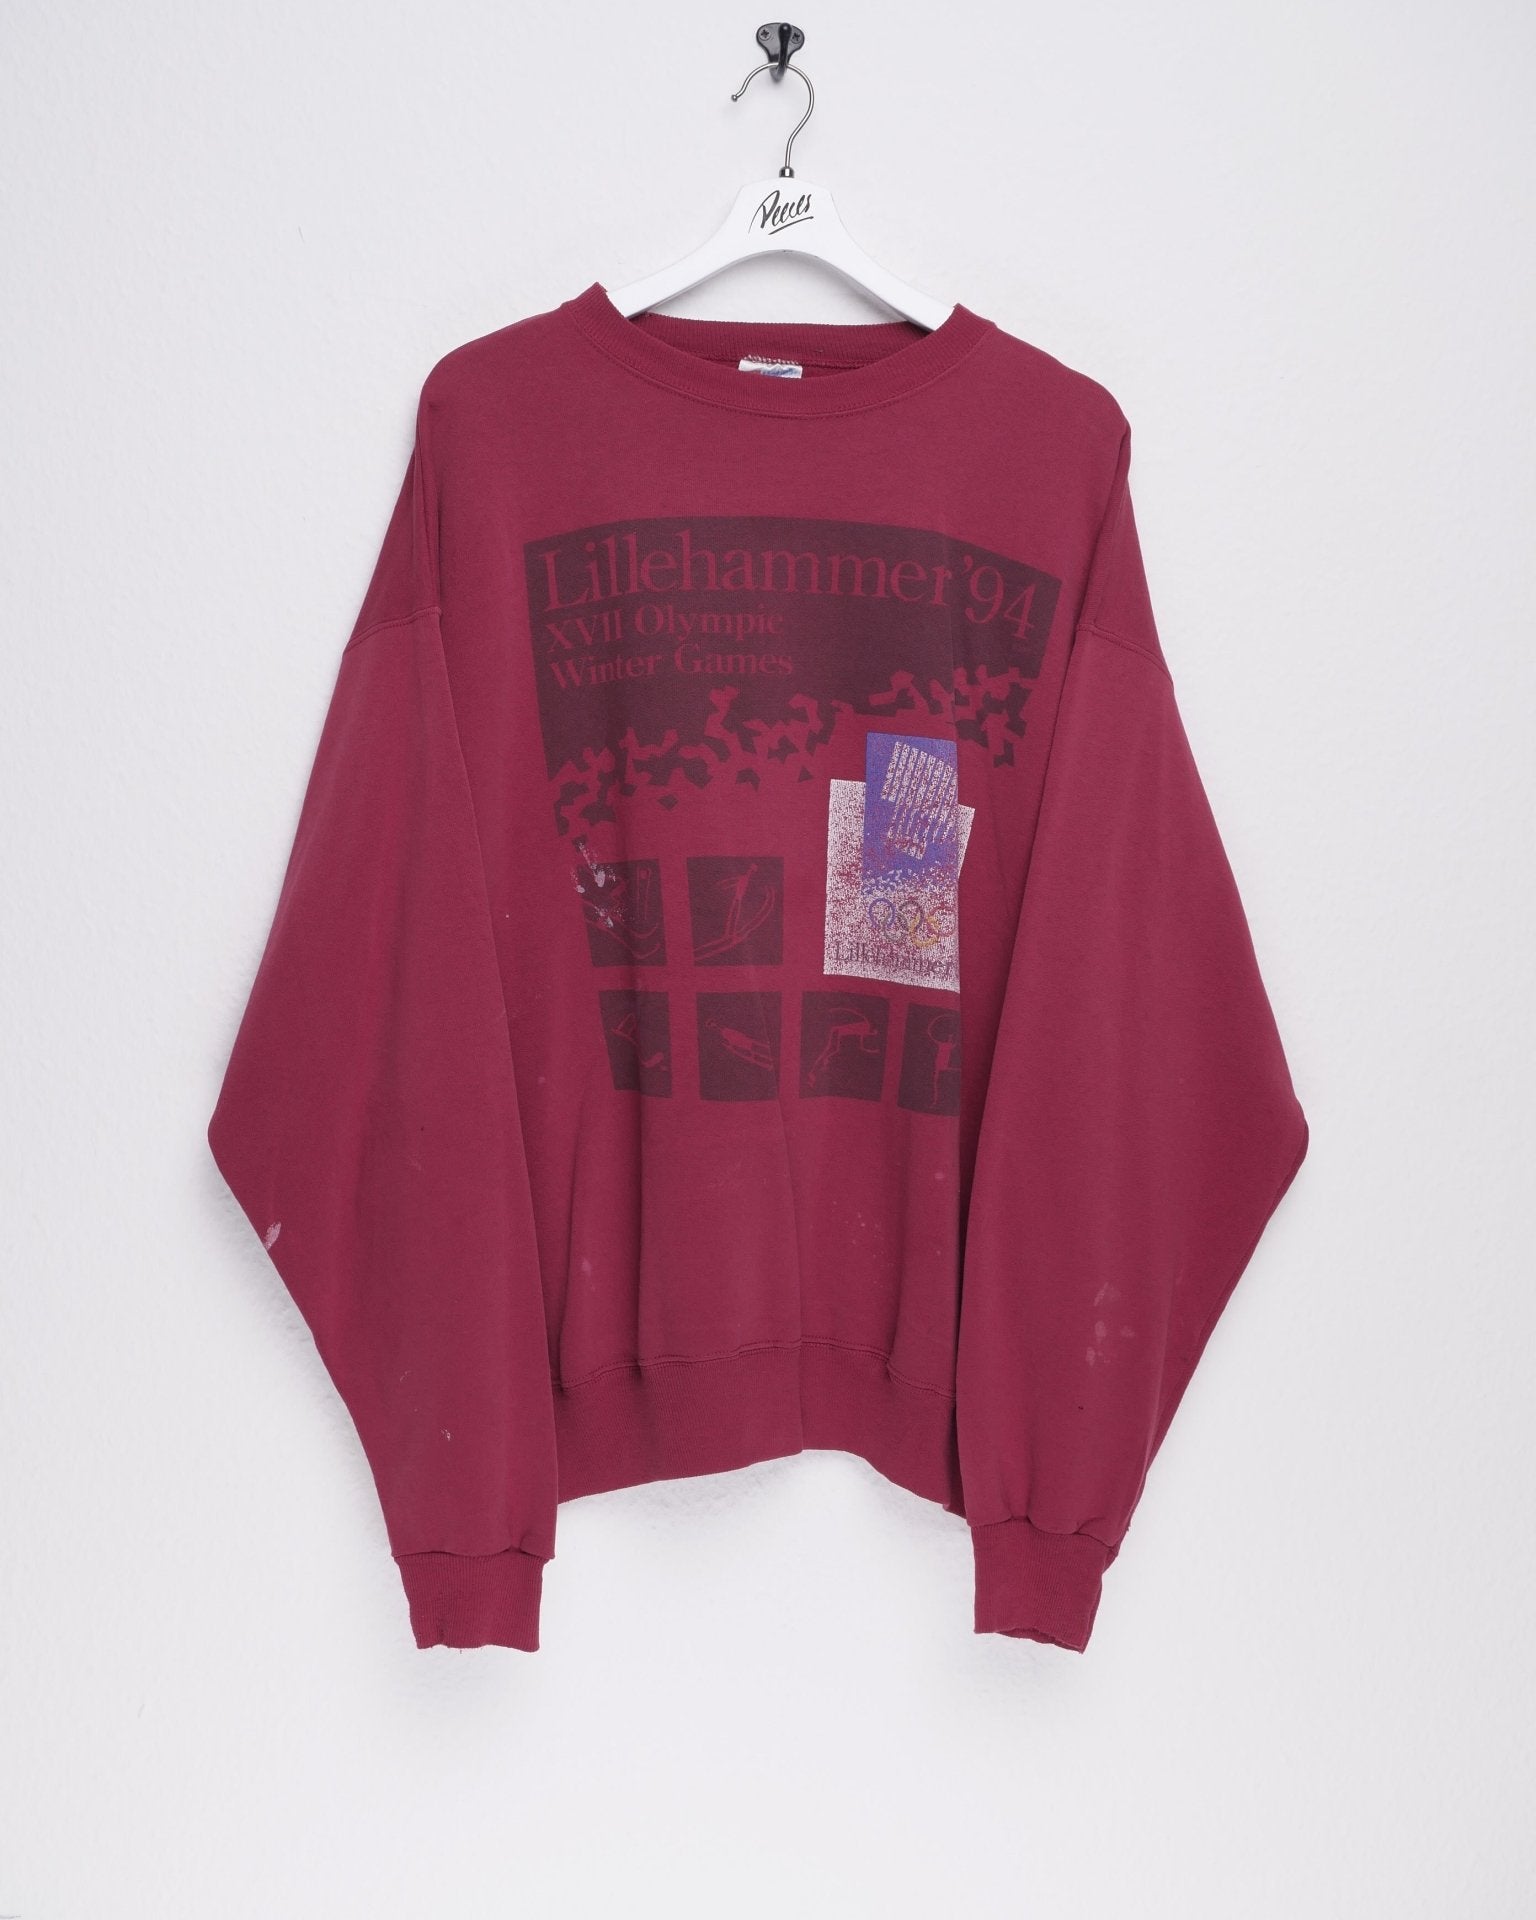 Lillhammer 94 XVII Olympic Winter Games printed Logo Sweater - Peeces